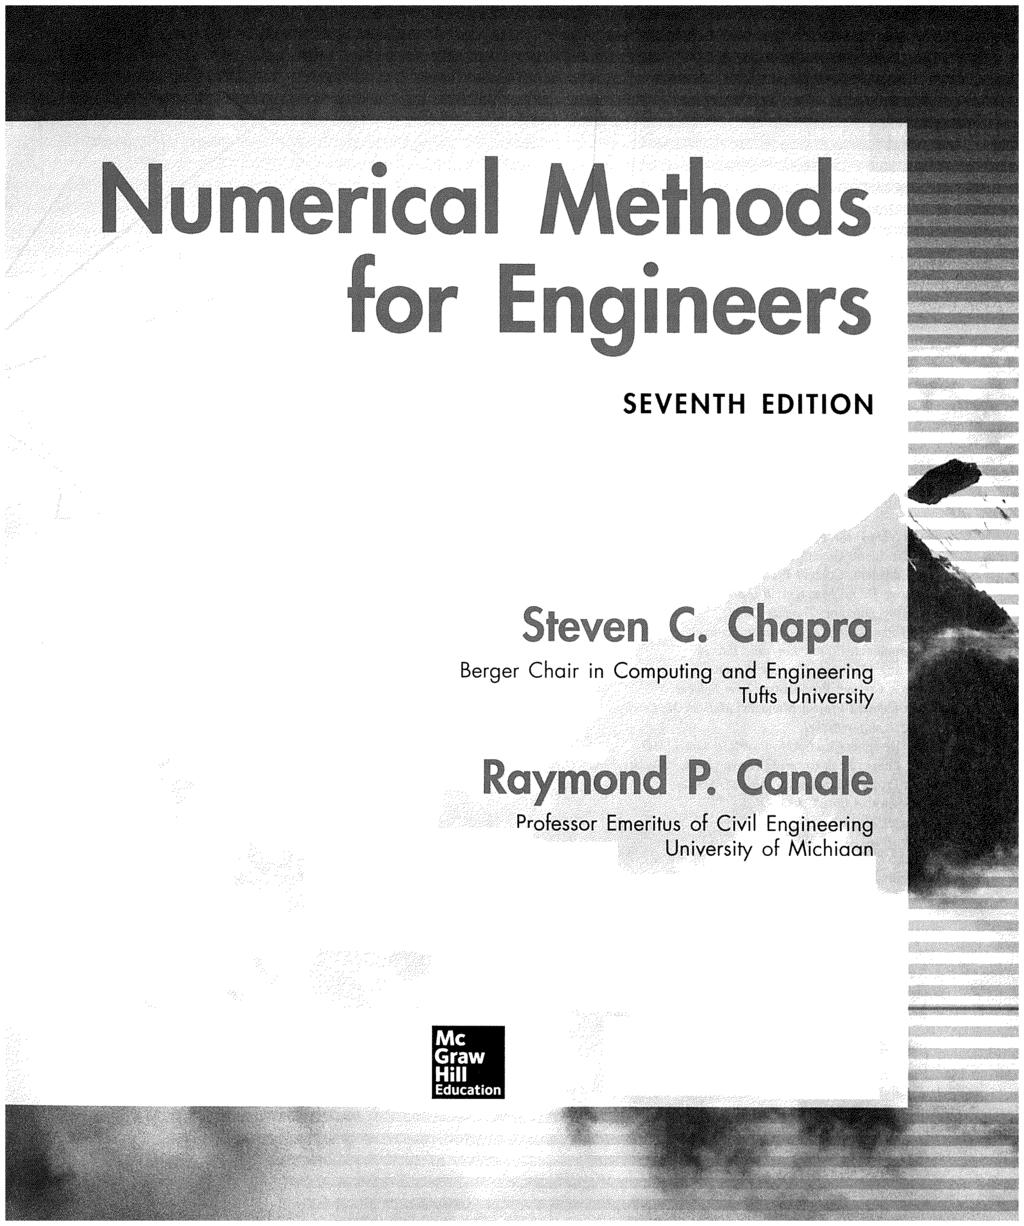 Numerical Methods for Engineers SEVENTH EDITION Steven C Chopra Berger Chair in Computing and Engineering Tufts University Raymond